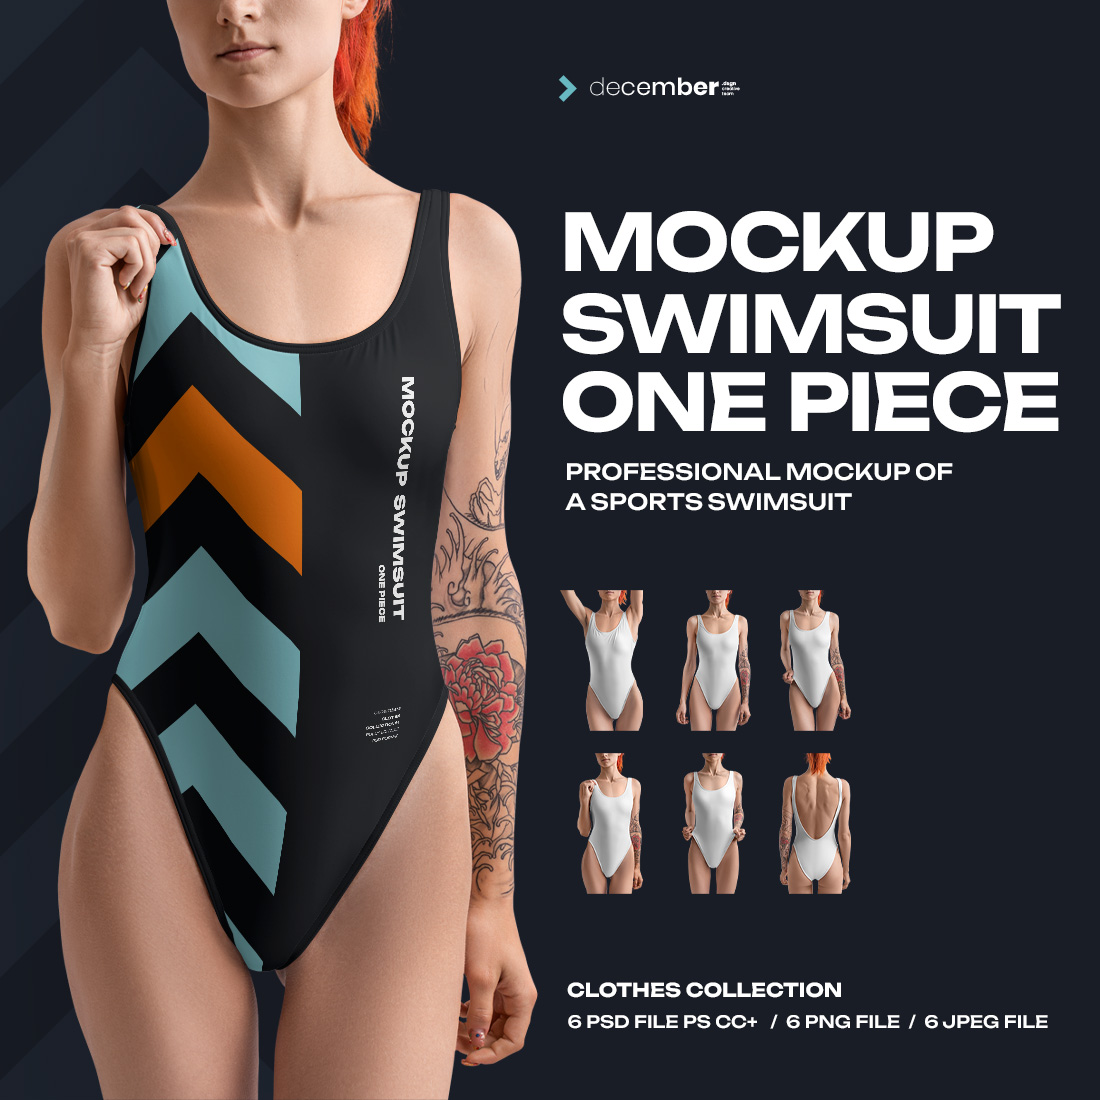 6 Mockups of a One Piece Sports Women's Swimsuit cover image.